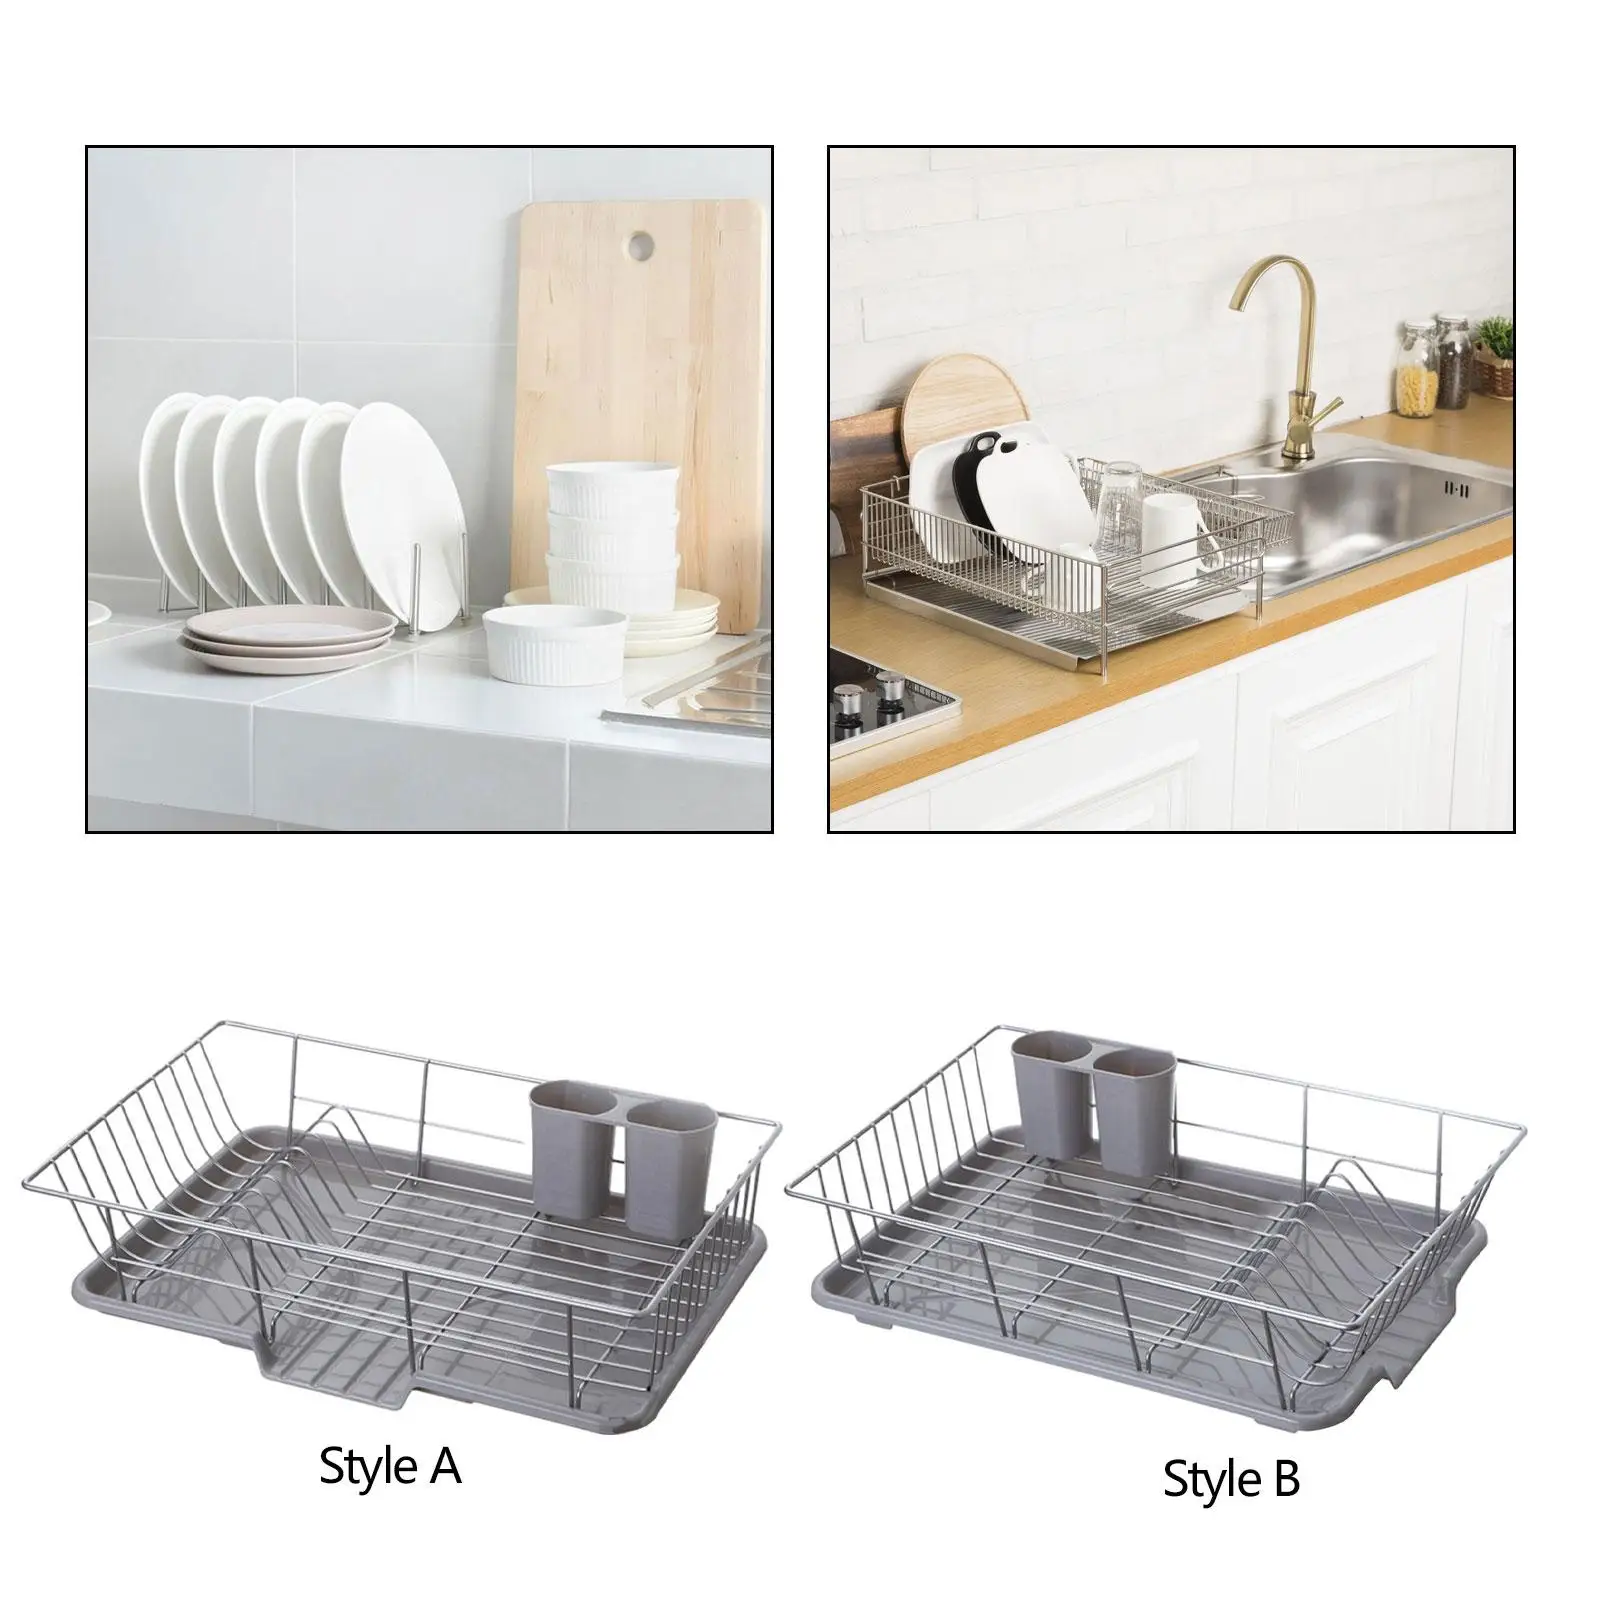 Kitchen Drying Rack Portable Dish Racks Self Draining Dish Dryer Counter Dish Drainer for Countertop Cups Bathroom Bowls Plates